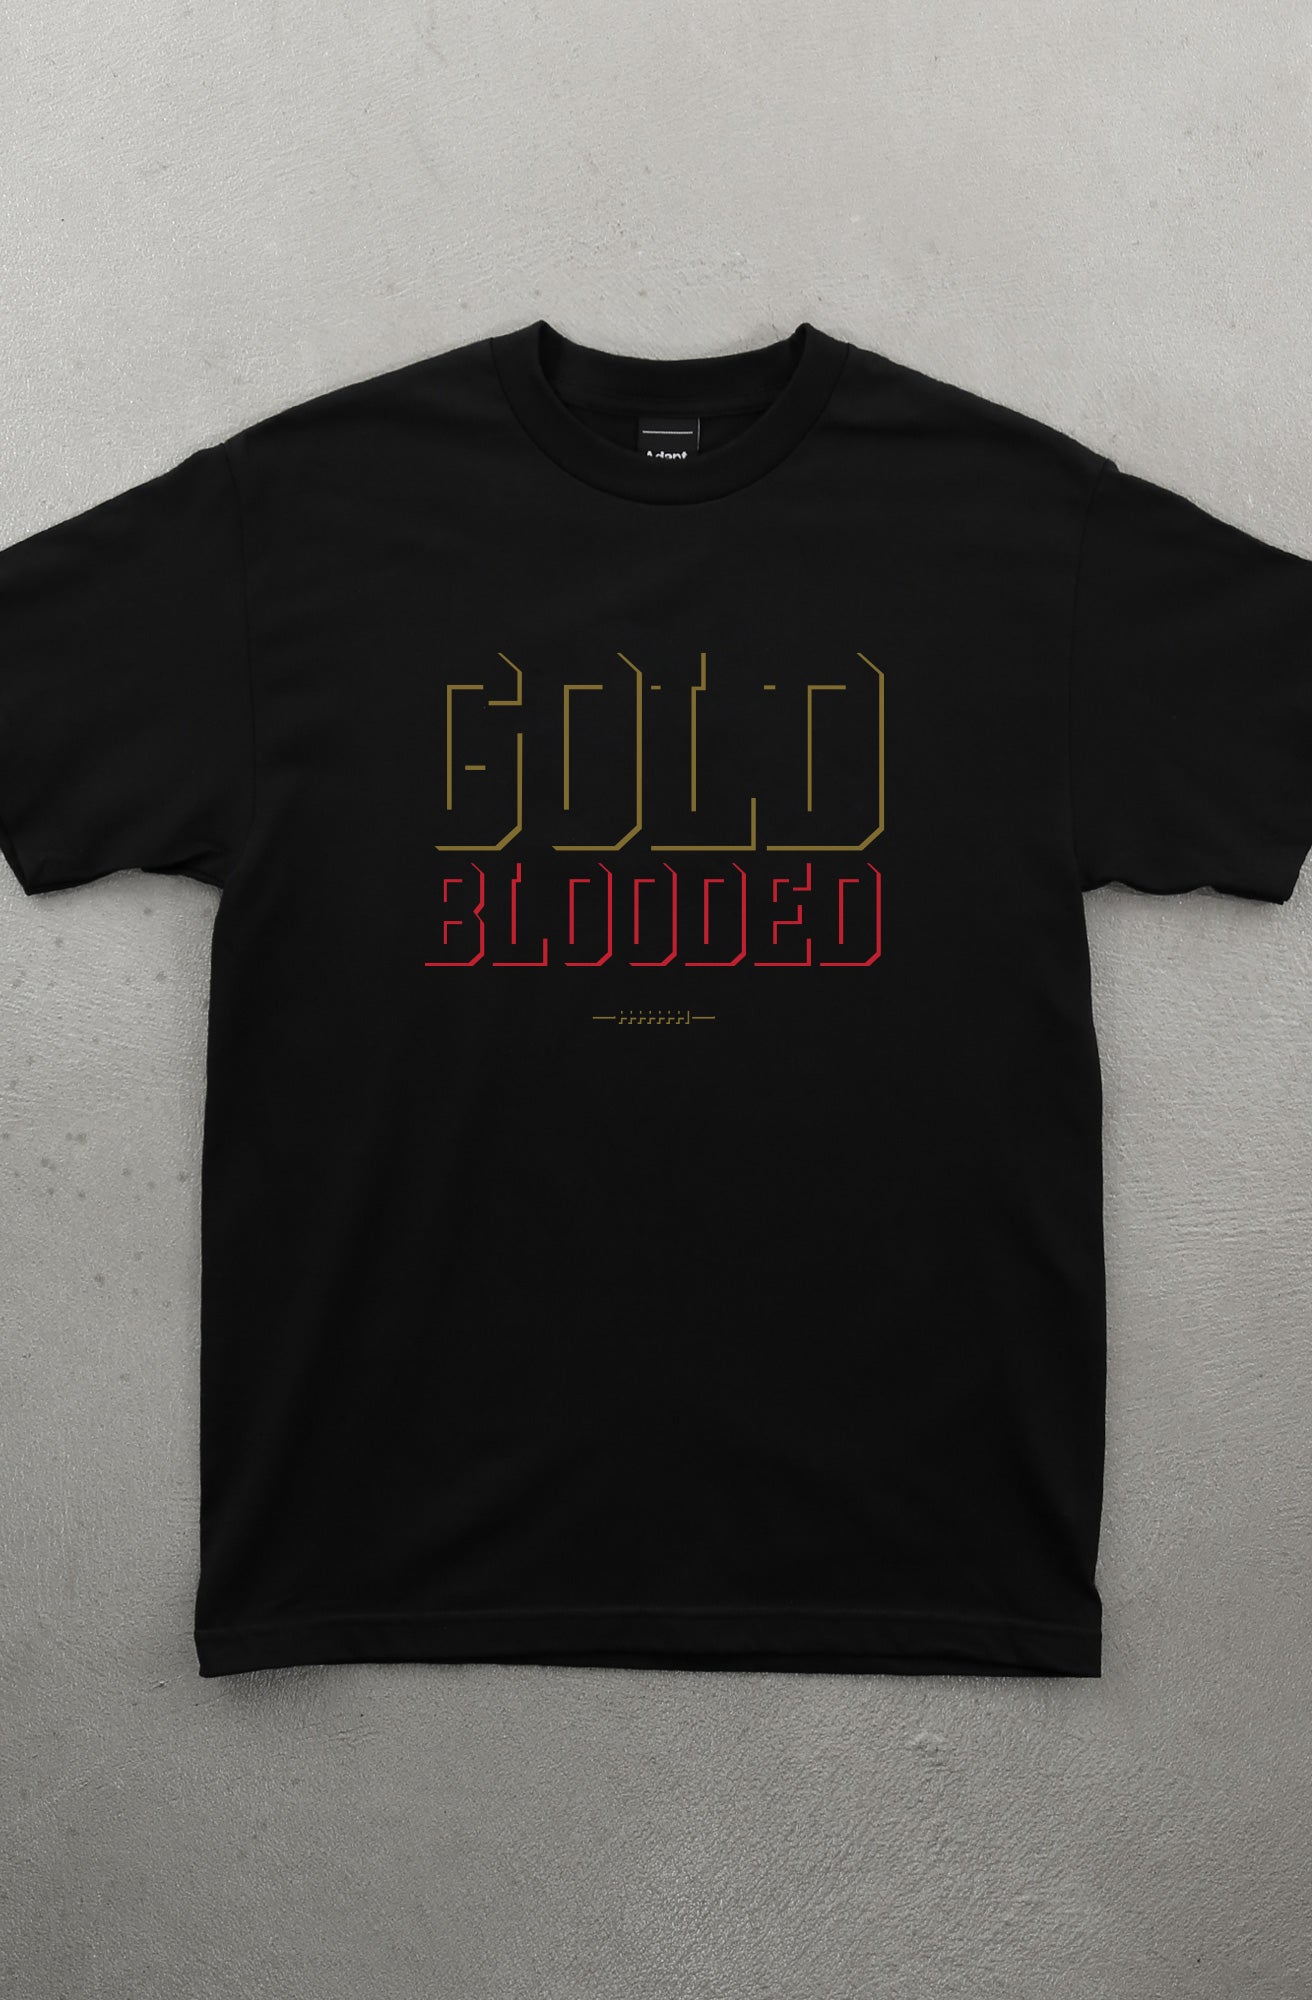 Gold Blooded Eclipse (Men's Black/Red Tee)